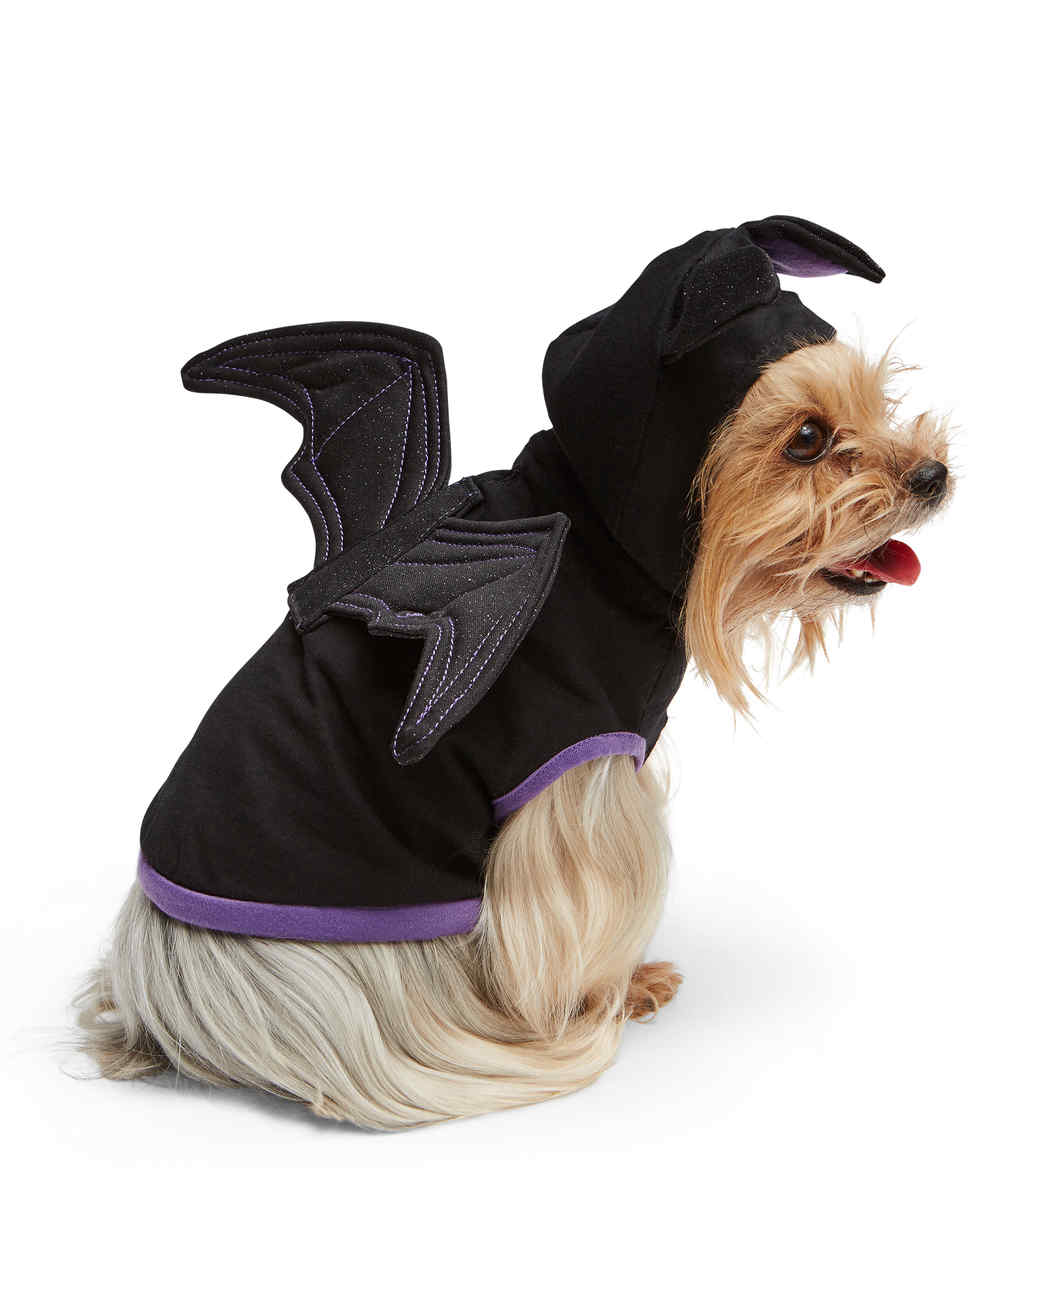 Matching Owner and Dog Costumes for a Pet-rifyingly Cute Halloween ...